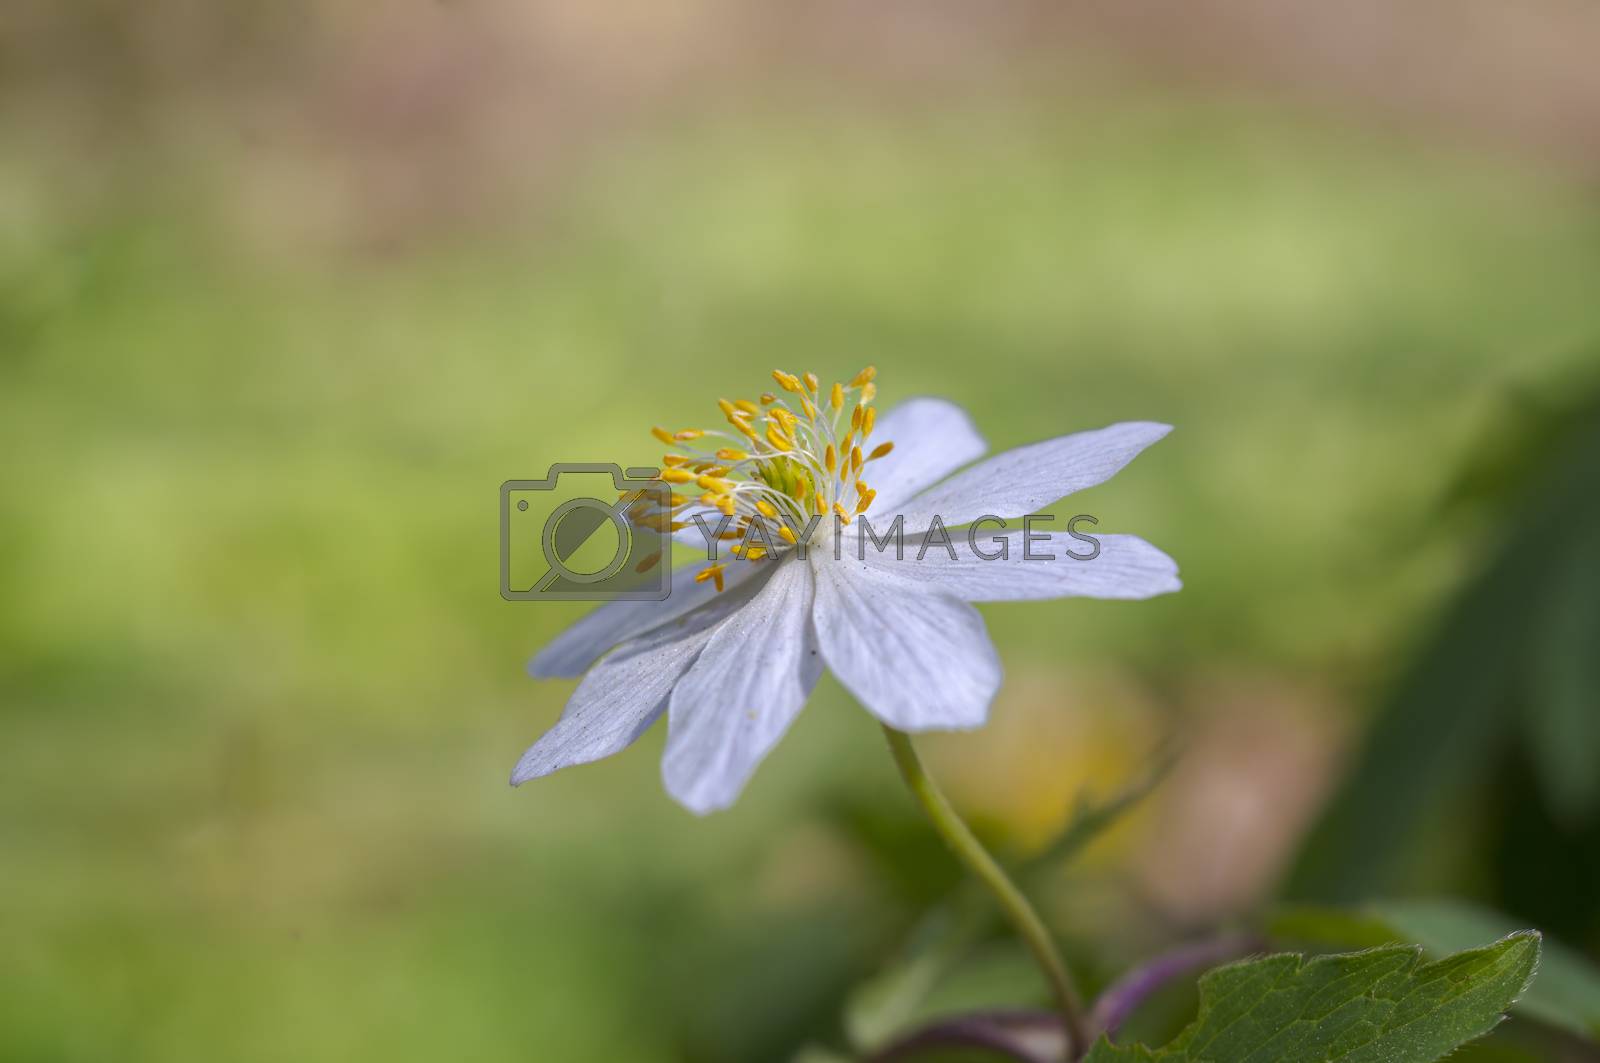 Royalty free image of grove wind flower in the green season forest by mario_plechaty_photography